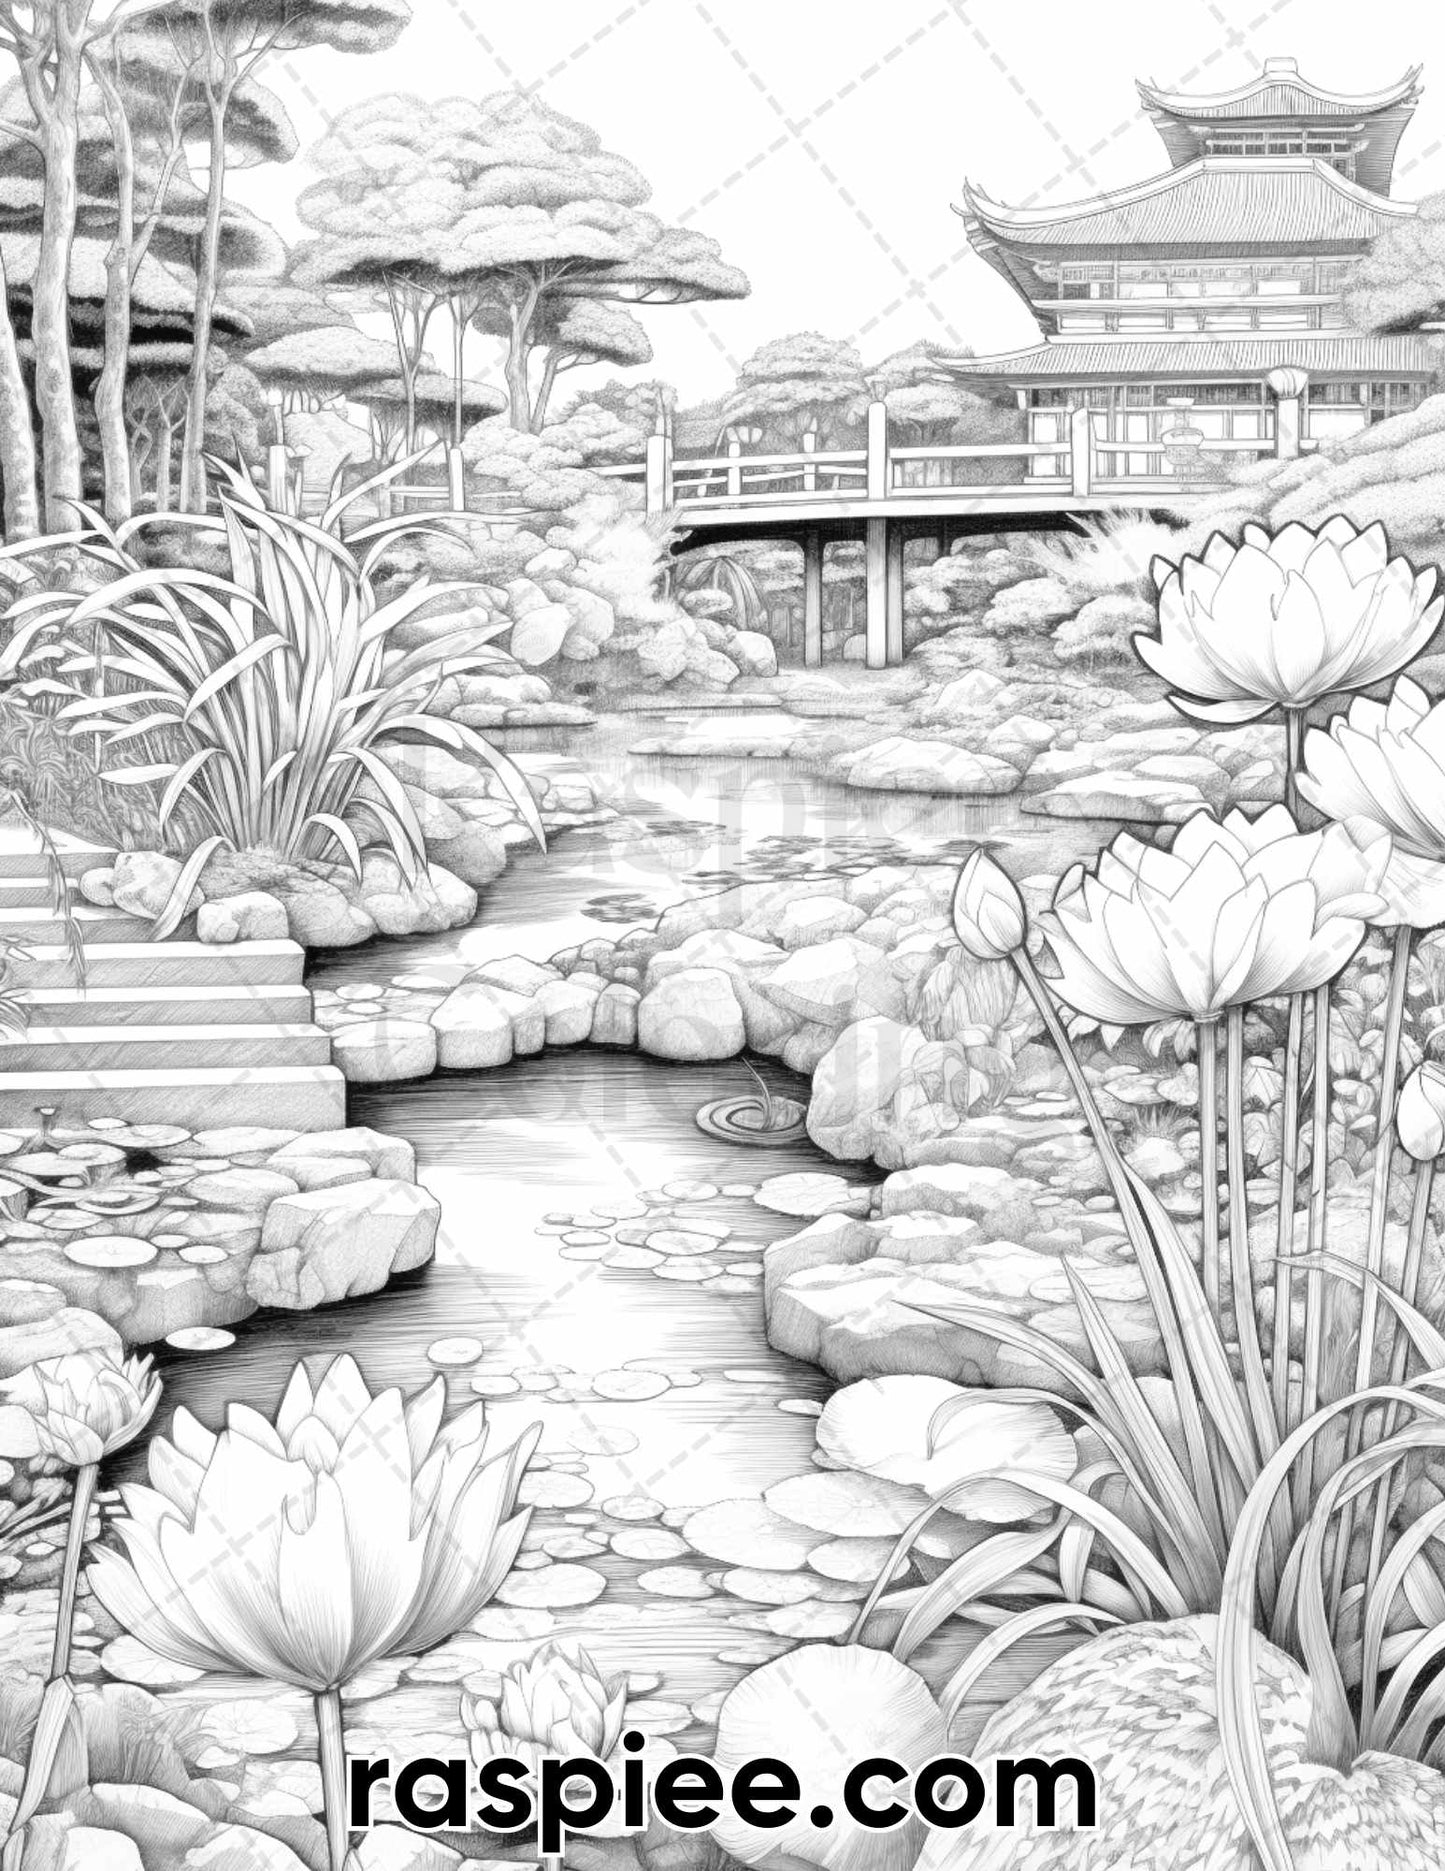 adult coloring pages, adult coloring sheets, adult coloring book pdf, adult coloring book printable, flower coloring pages for adults, flower coloring book printable, adult coloring book pdf, plants coloring pages for adults, zen garden coloring pages, plants coloring pages